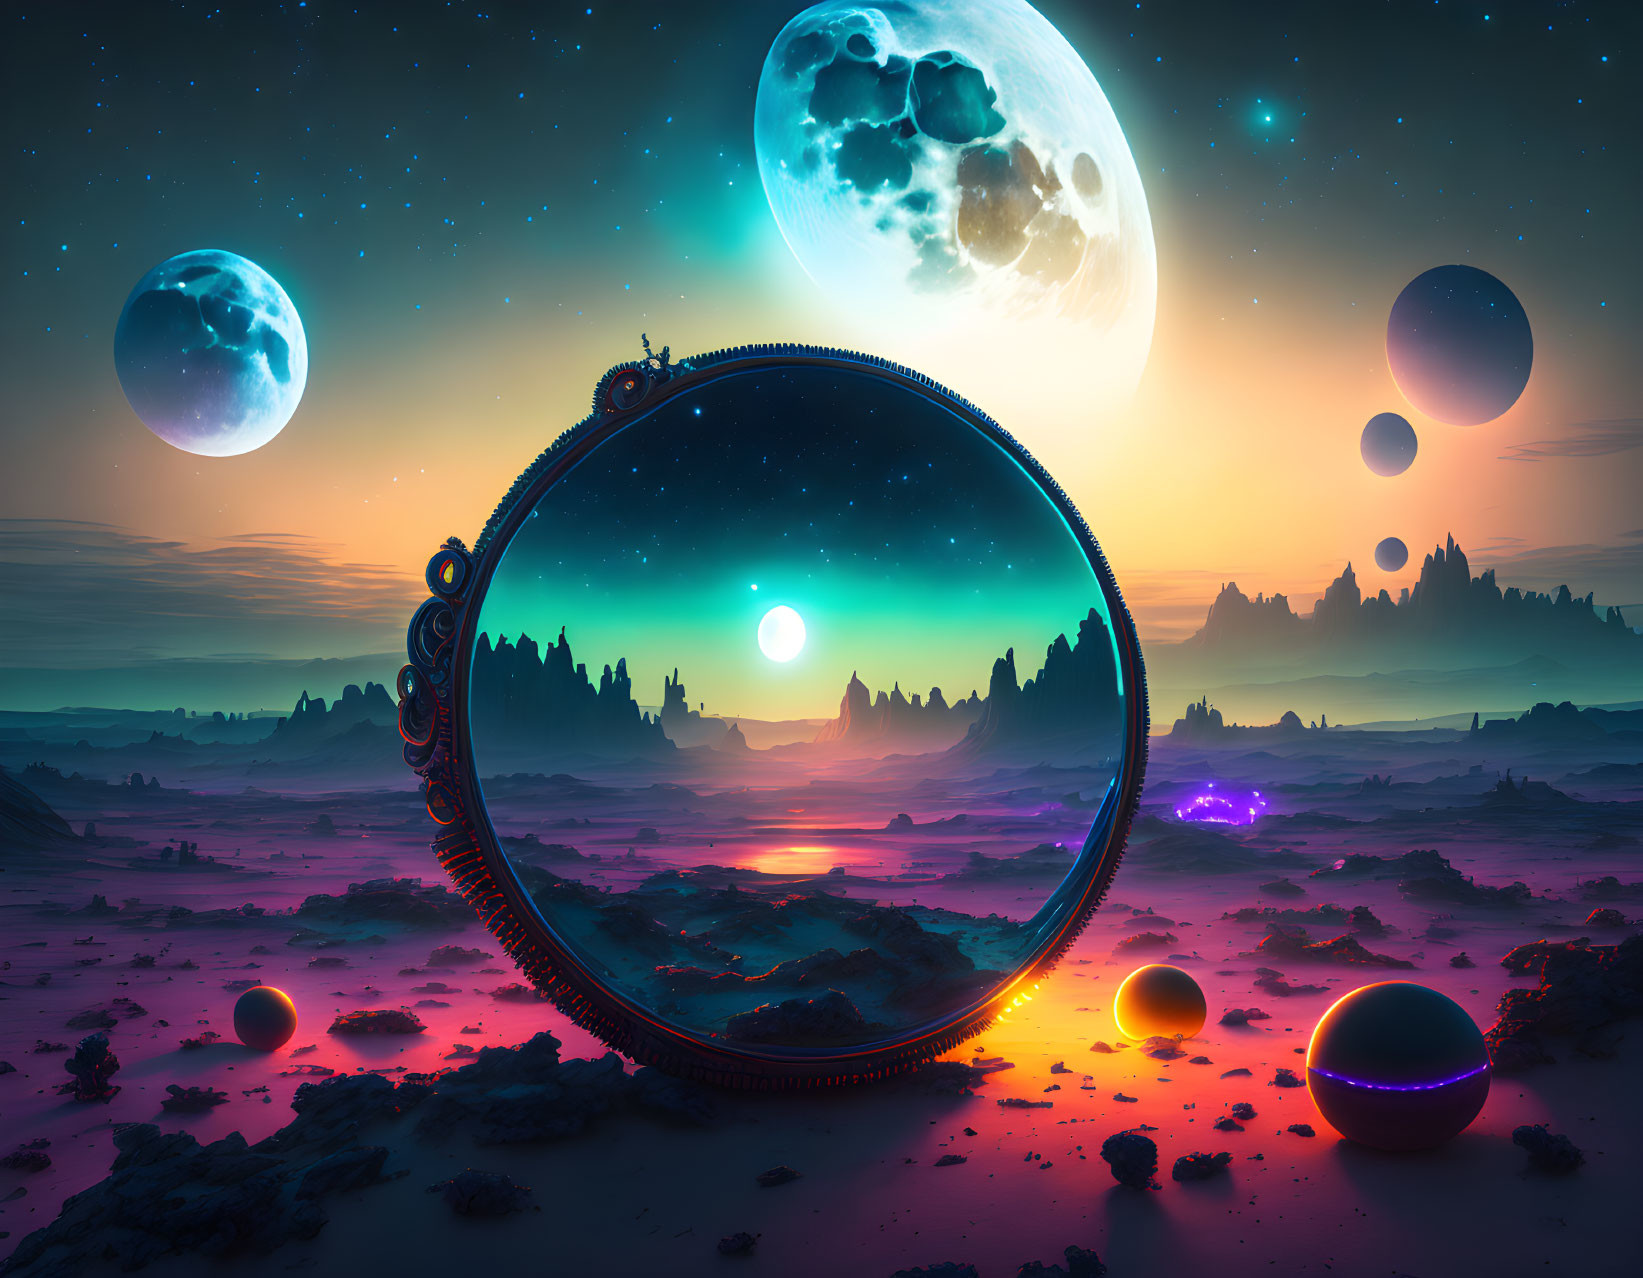 Vibrant surreal landscape with multiple moons and ornate mirror reflection